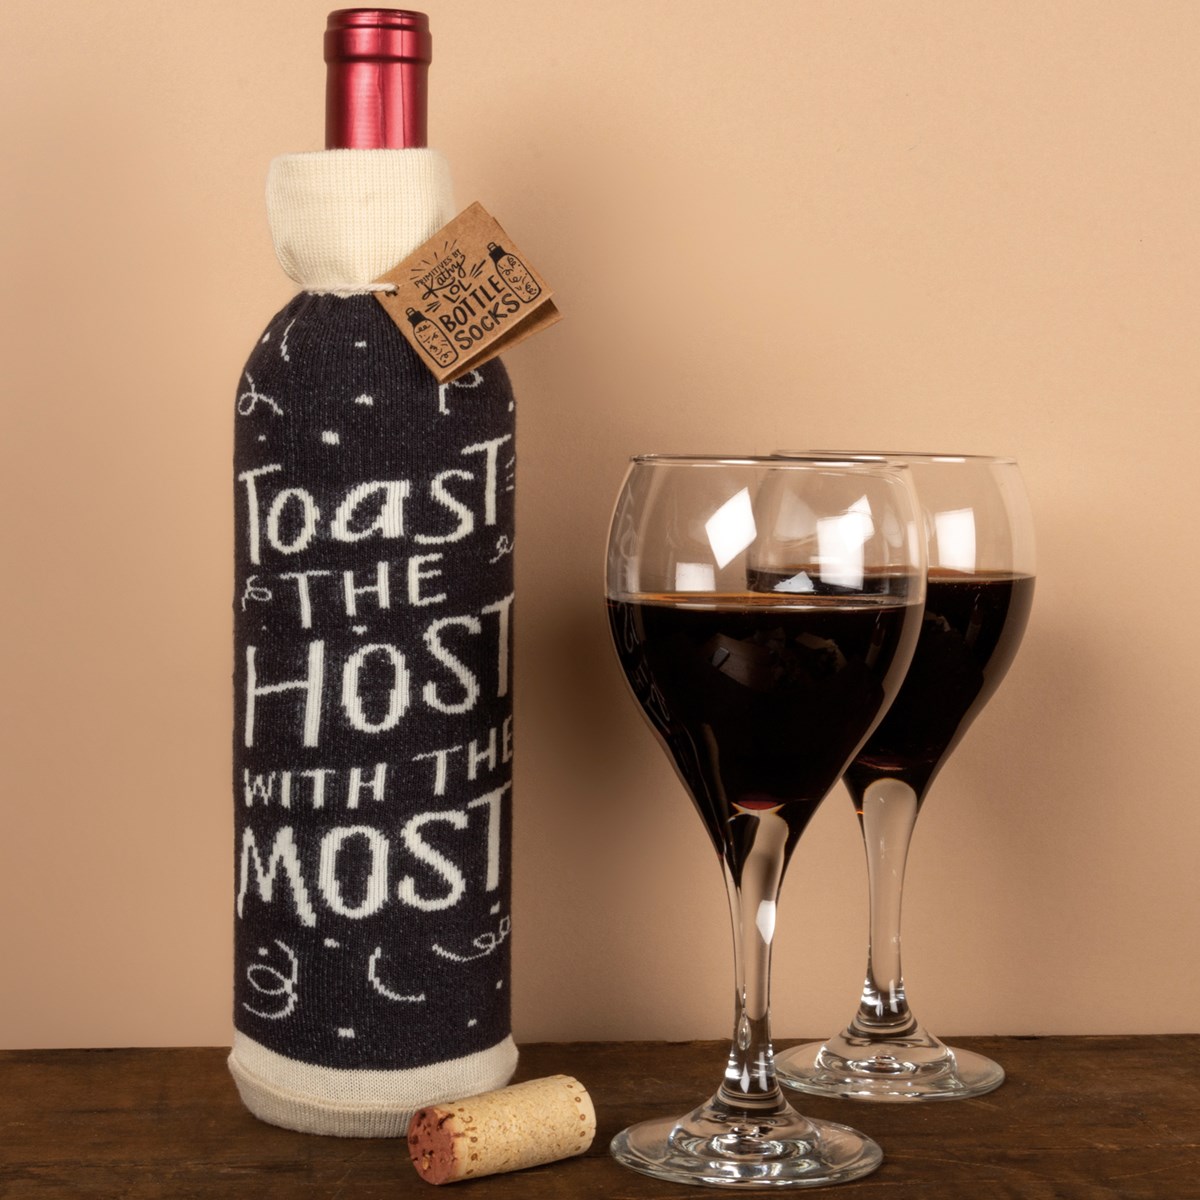 Toast The Host With The Most Bottle Sock - Cotton, Nylon, Spandex